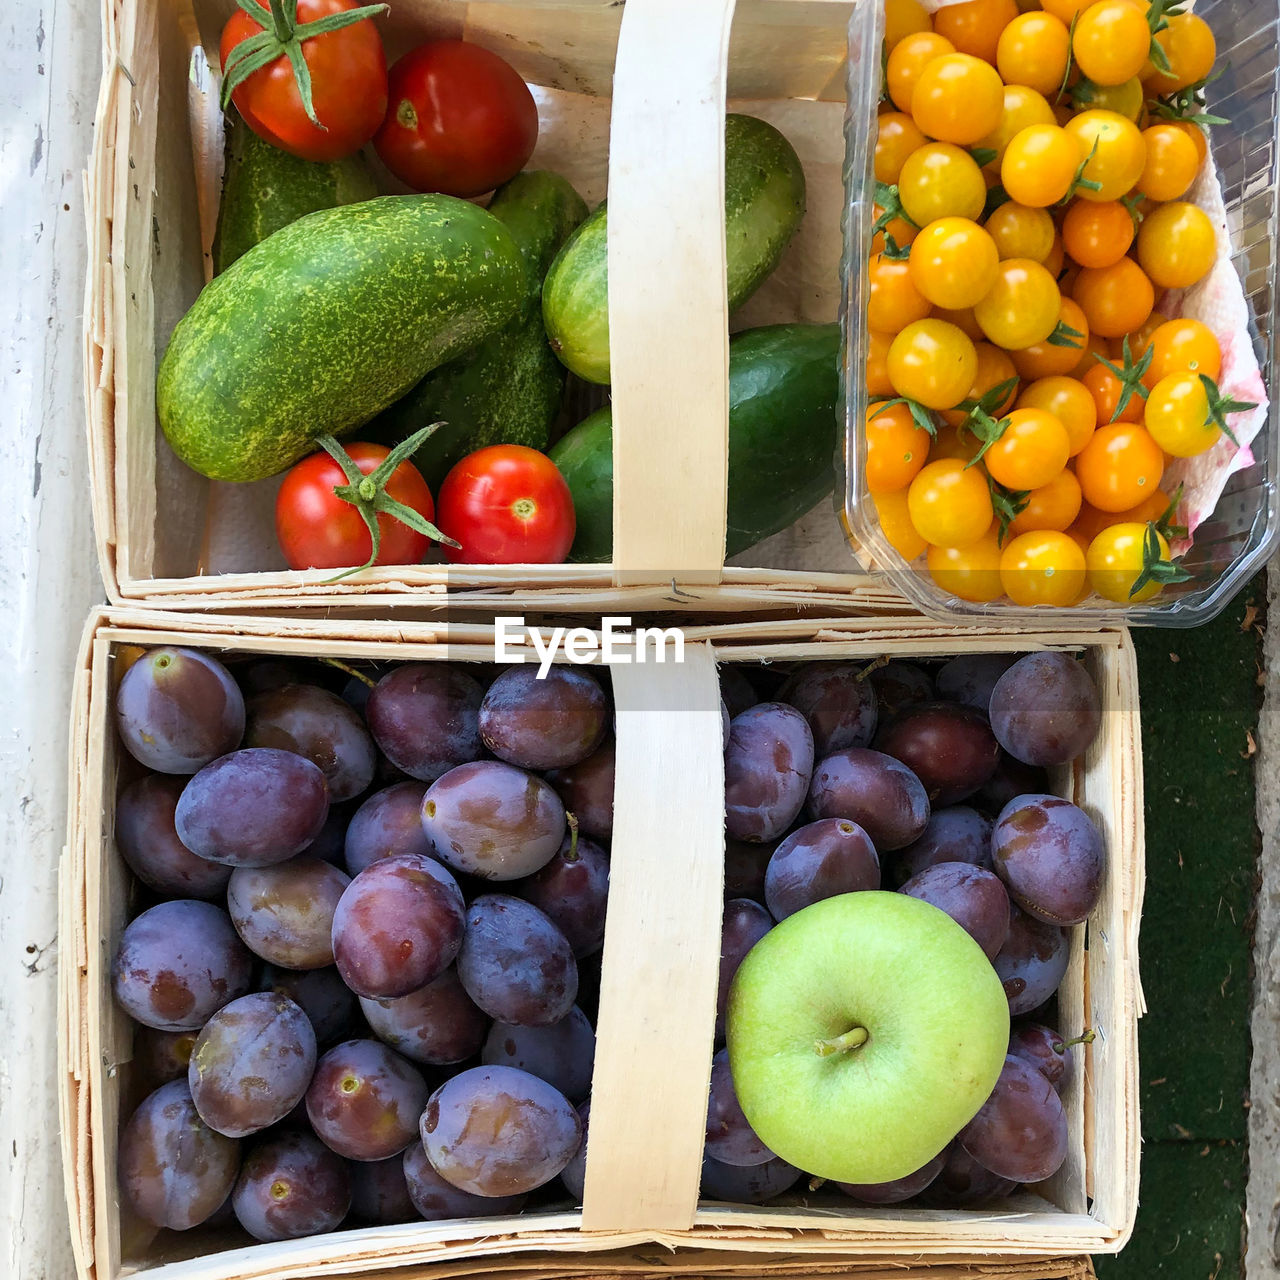 HIGH ANGLE VIEW OF FRUITS IN CONTAINER